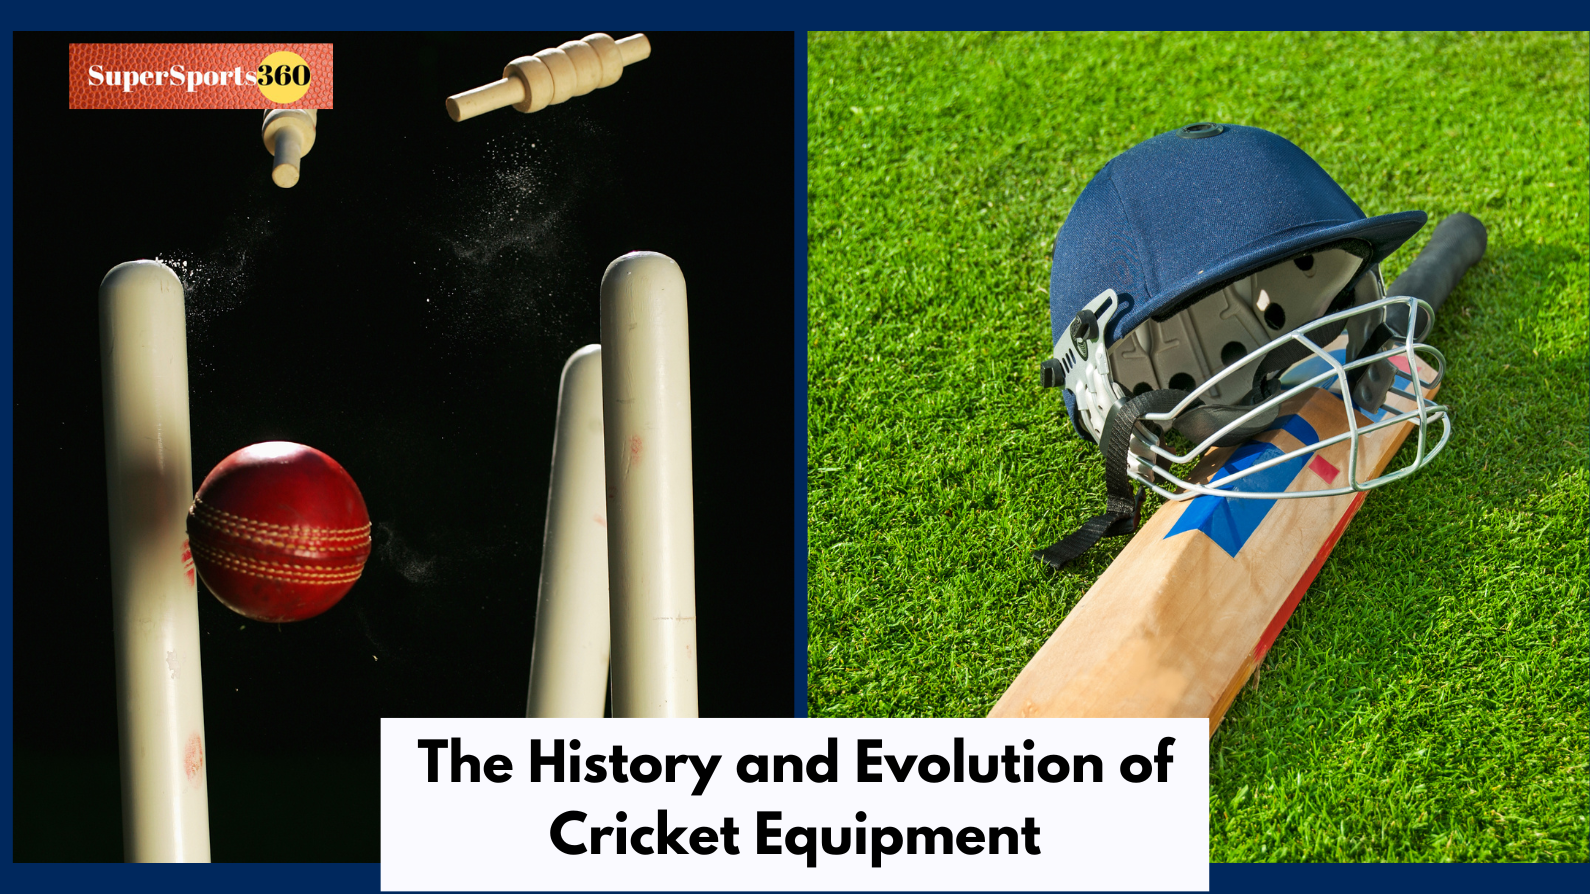 The History and Evolution of Cricket Equipment